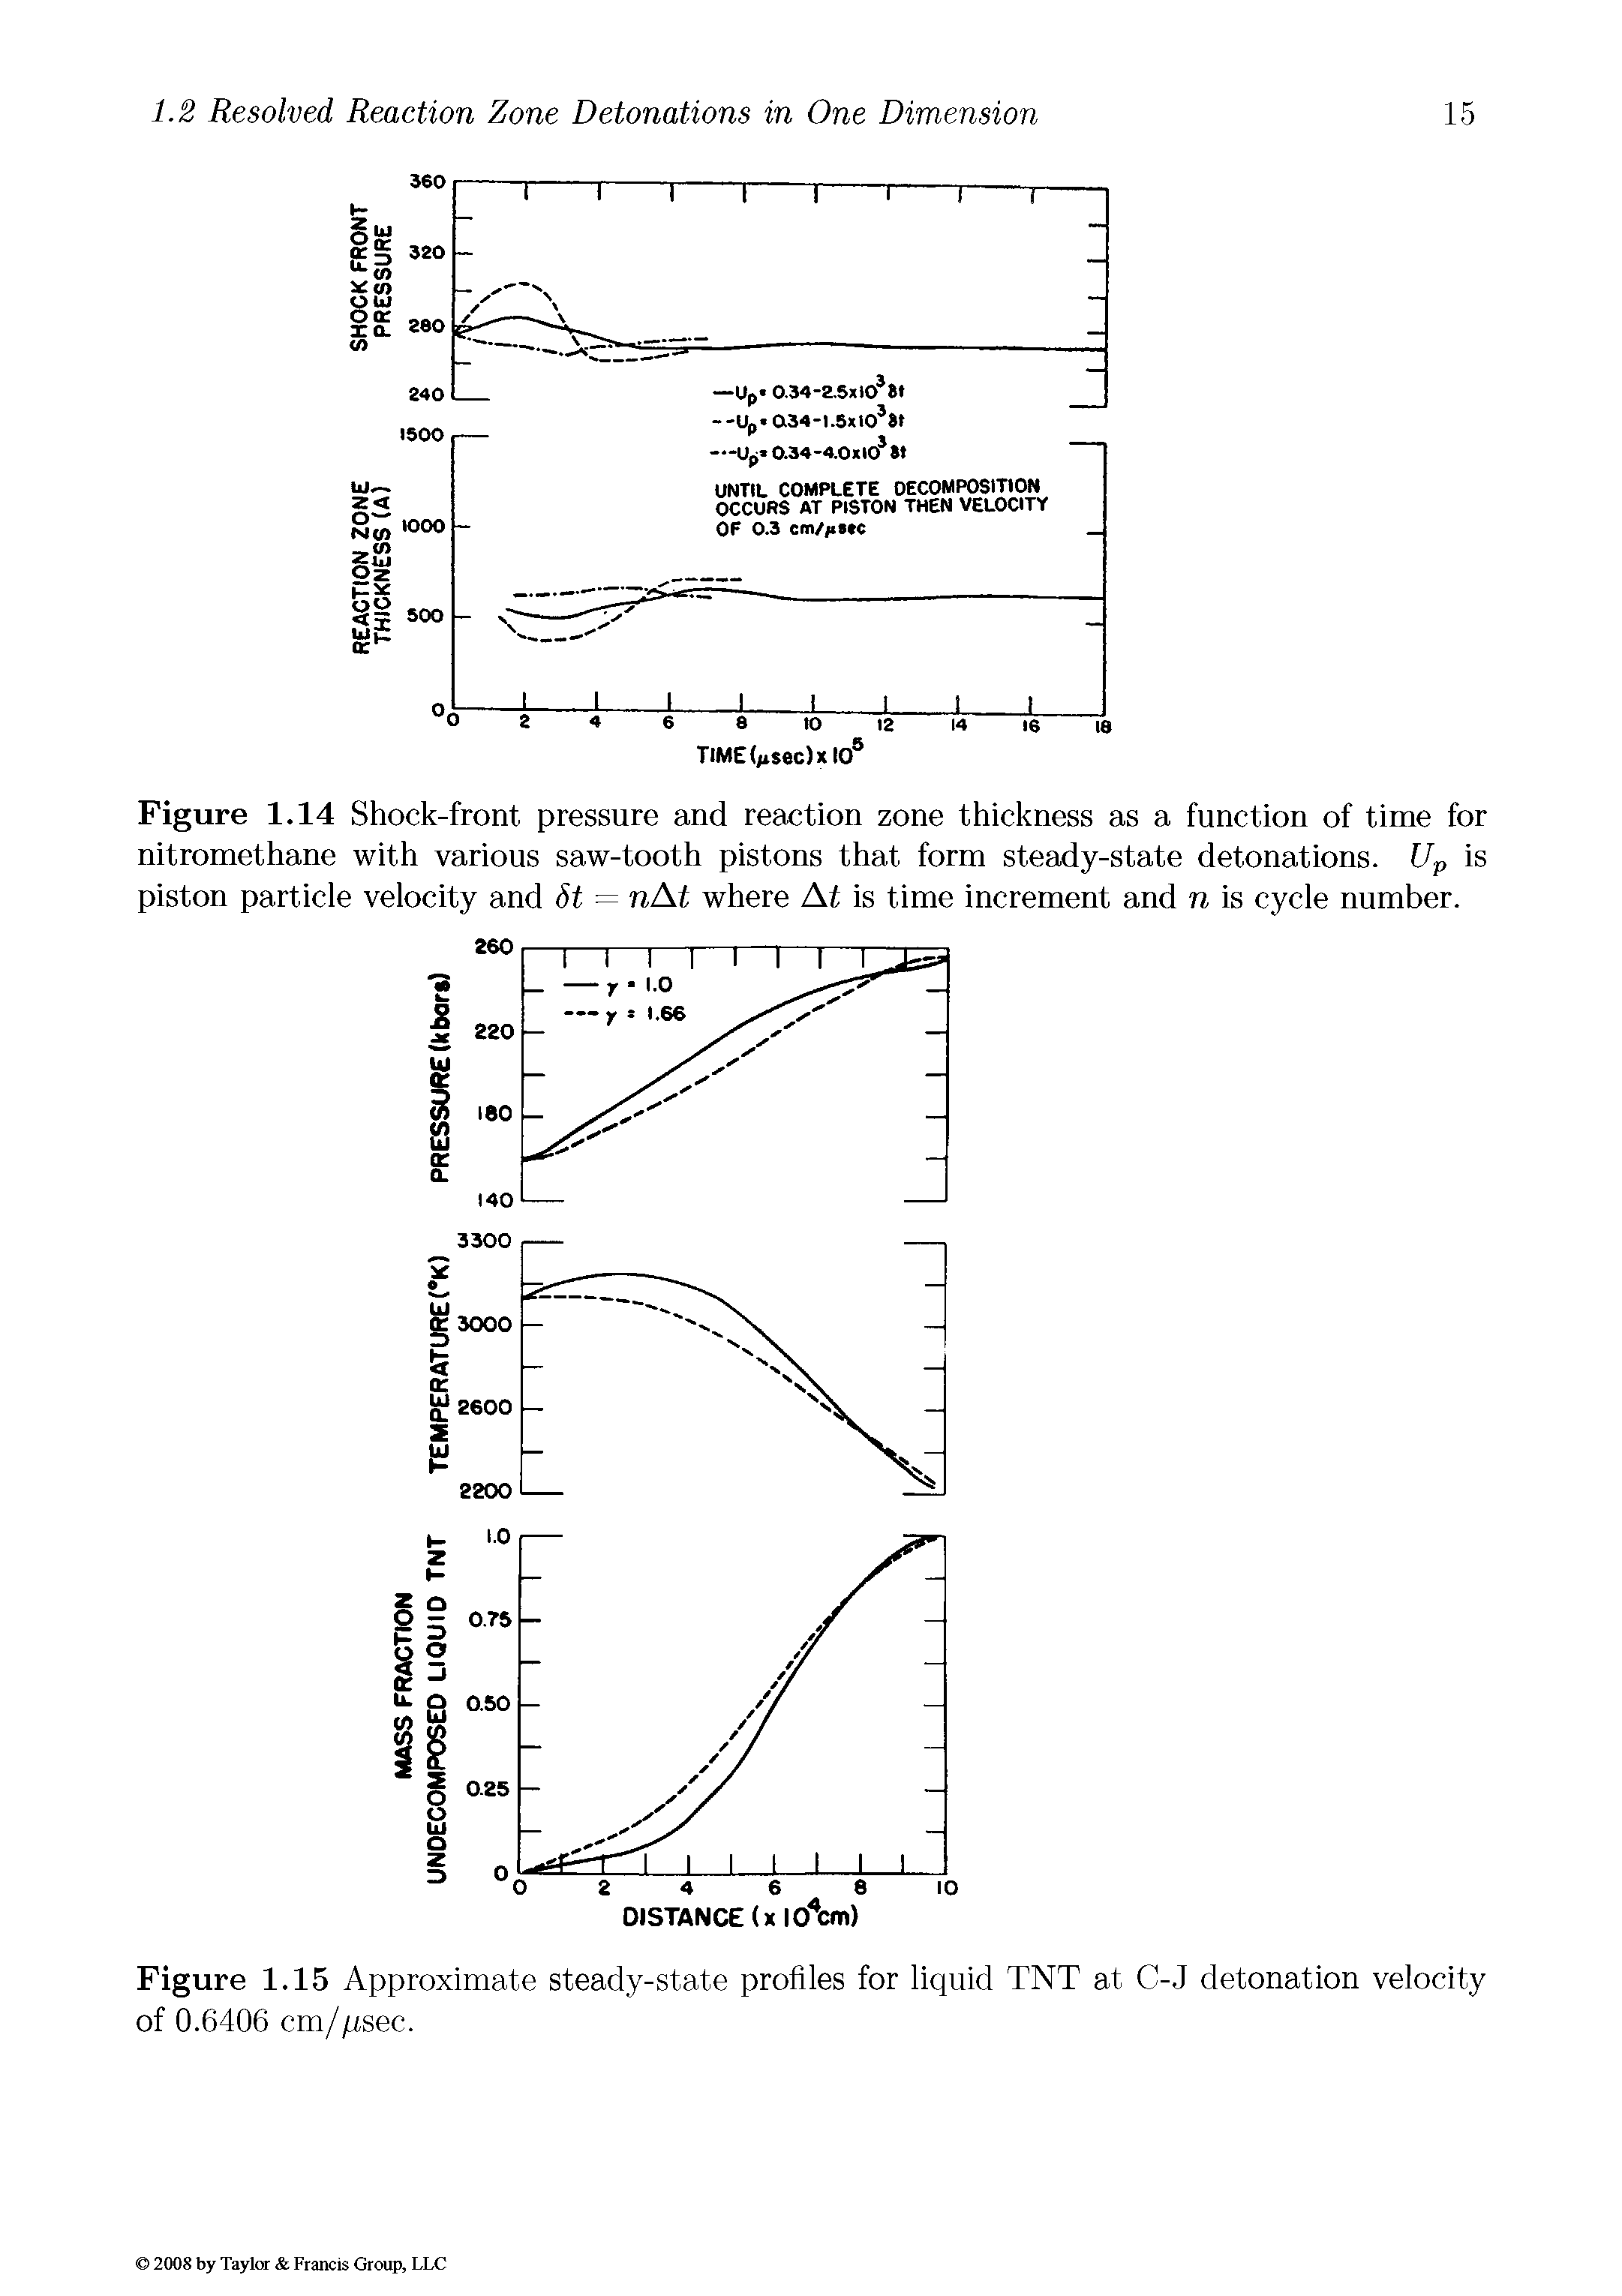 Figure 1.14 Shock-front pressure and reaction zone thickness as a function of time for nitromethane with various saw-tooth pistons that form steady-state detonations. Up is piston particle velocity and St = nAt where At is time increment and n is cycle number.